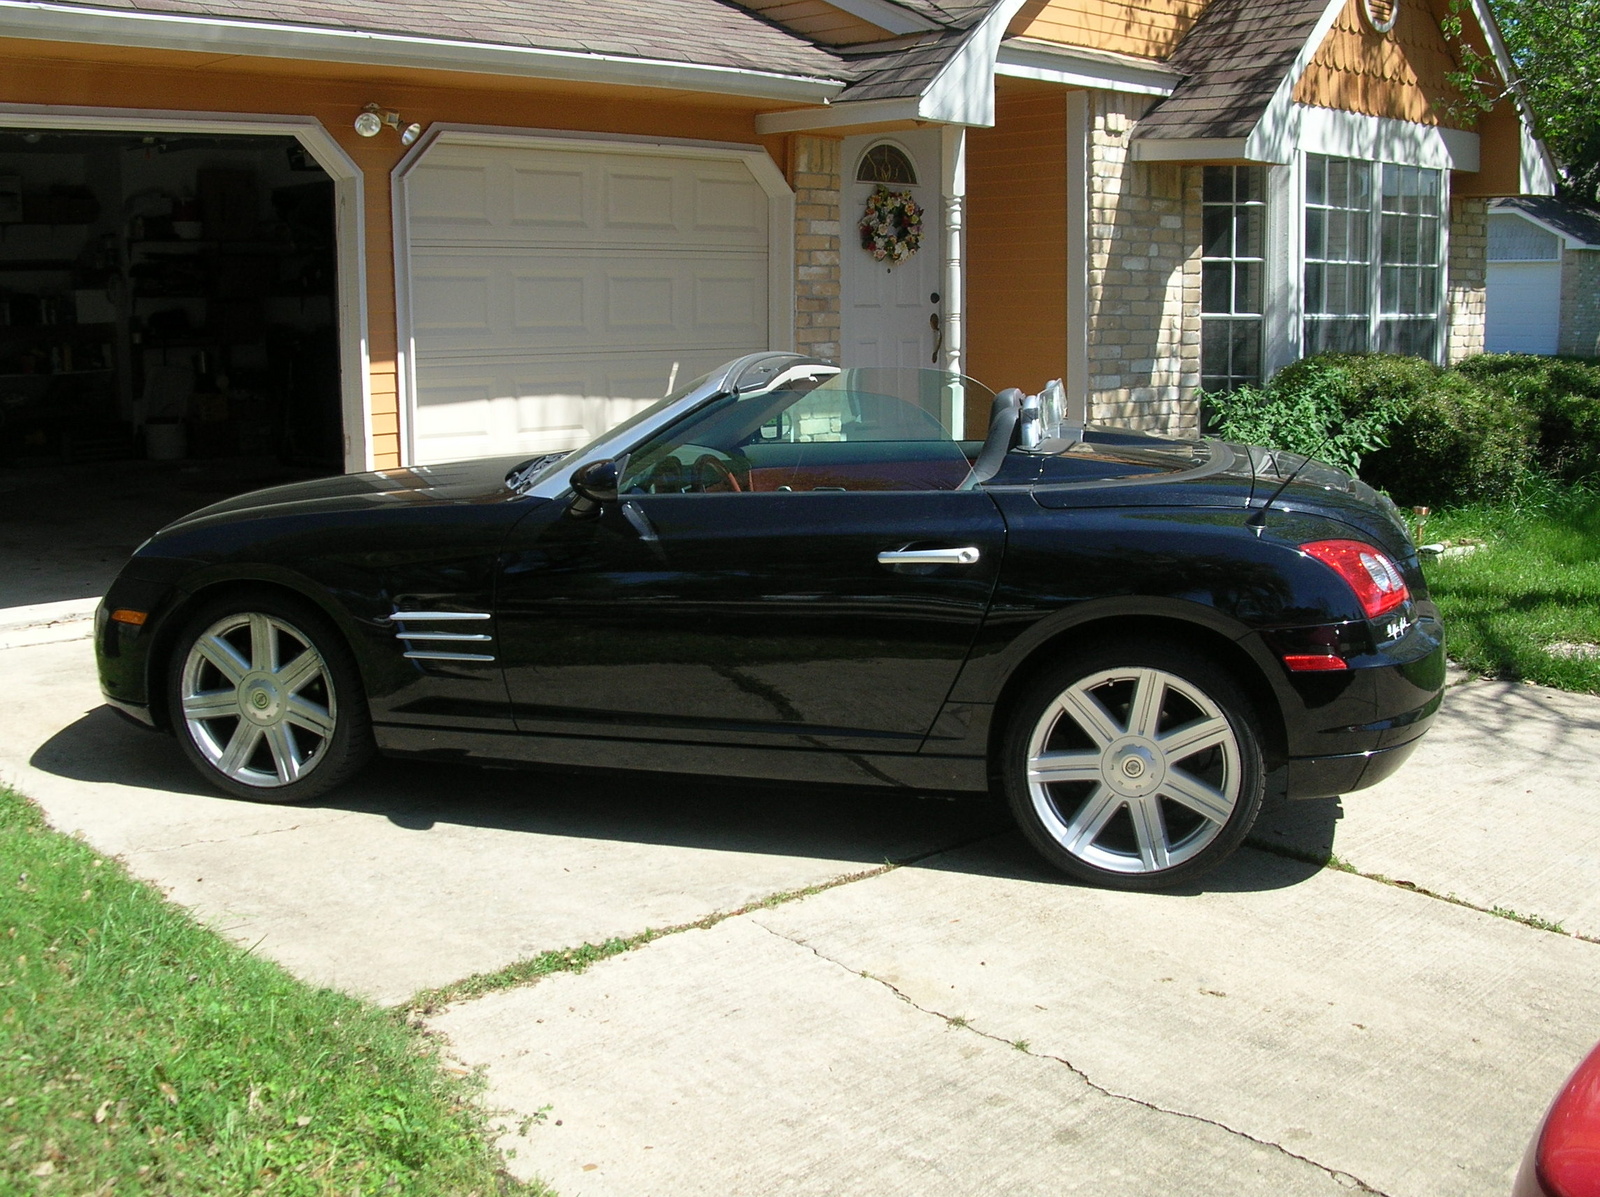 2005 Chrysler crossfire limited convertible reviews #3